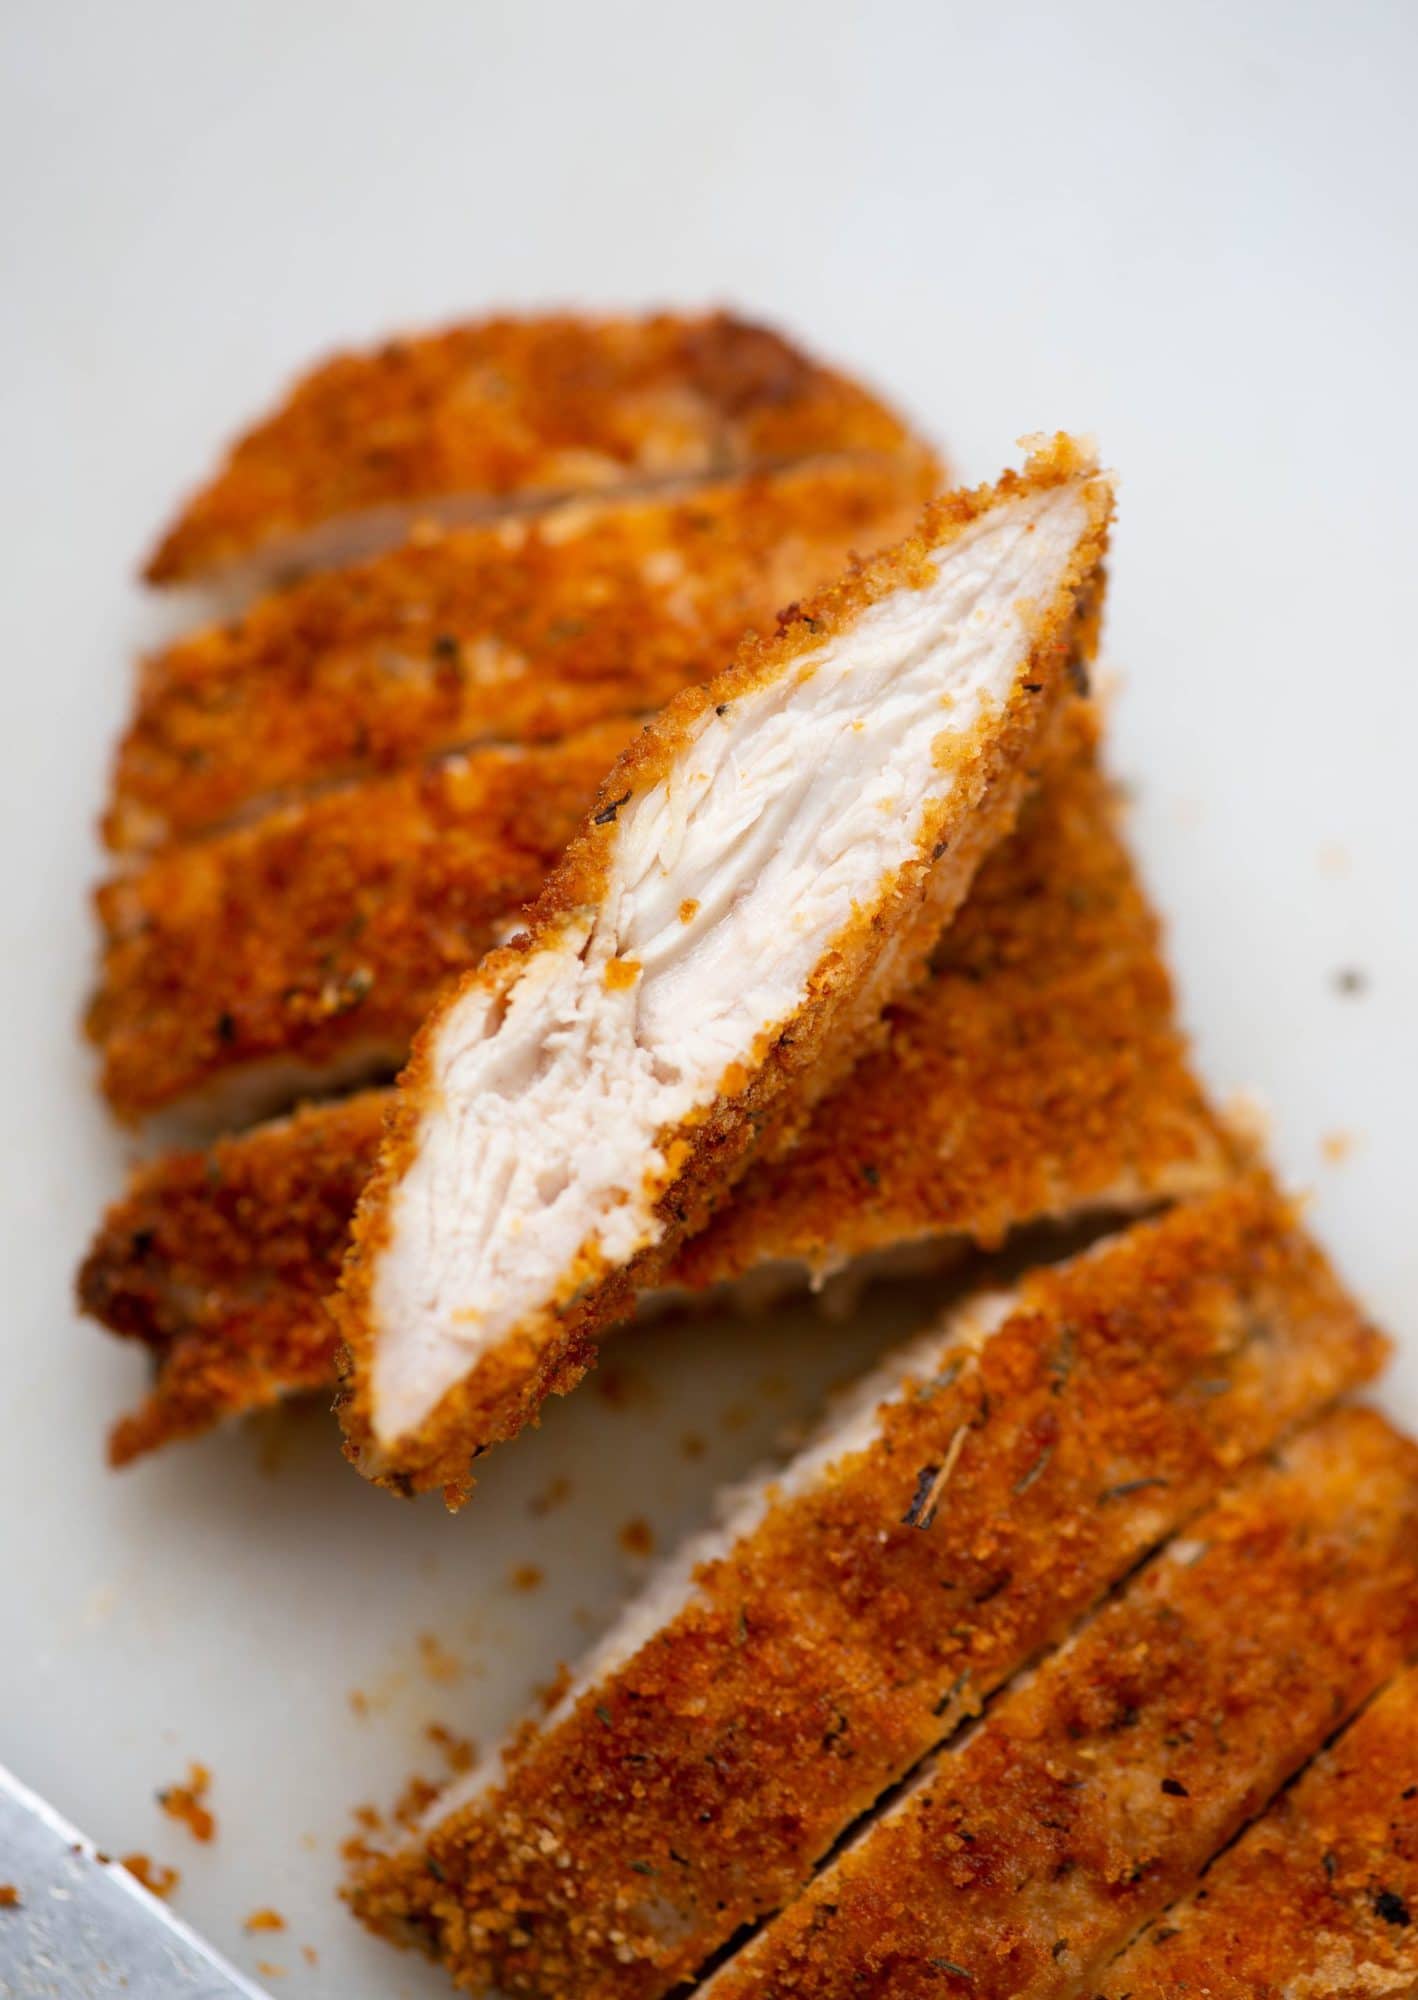 Slice of Air fried chicken breast shows crispy crust on outside and juicy chicken inside.